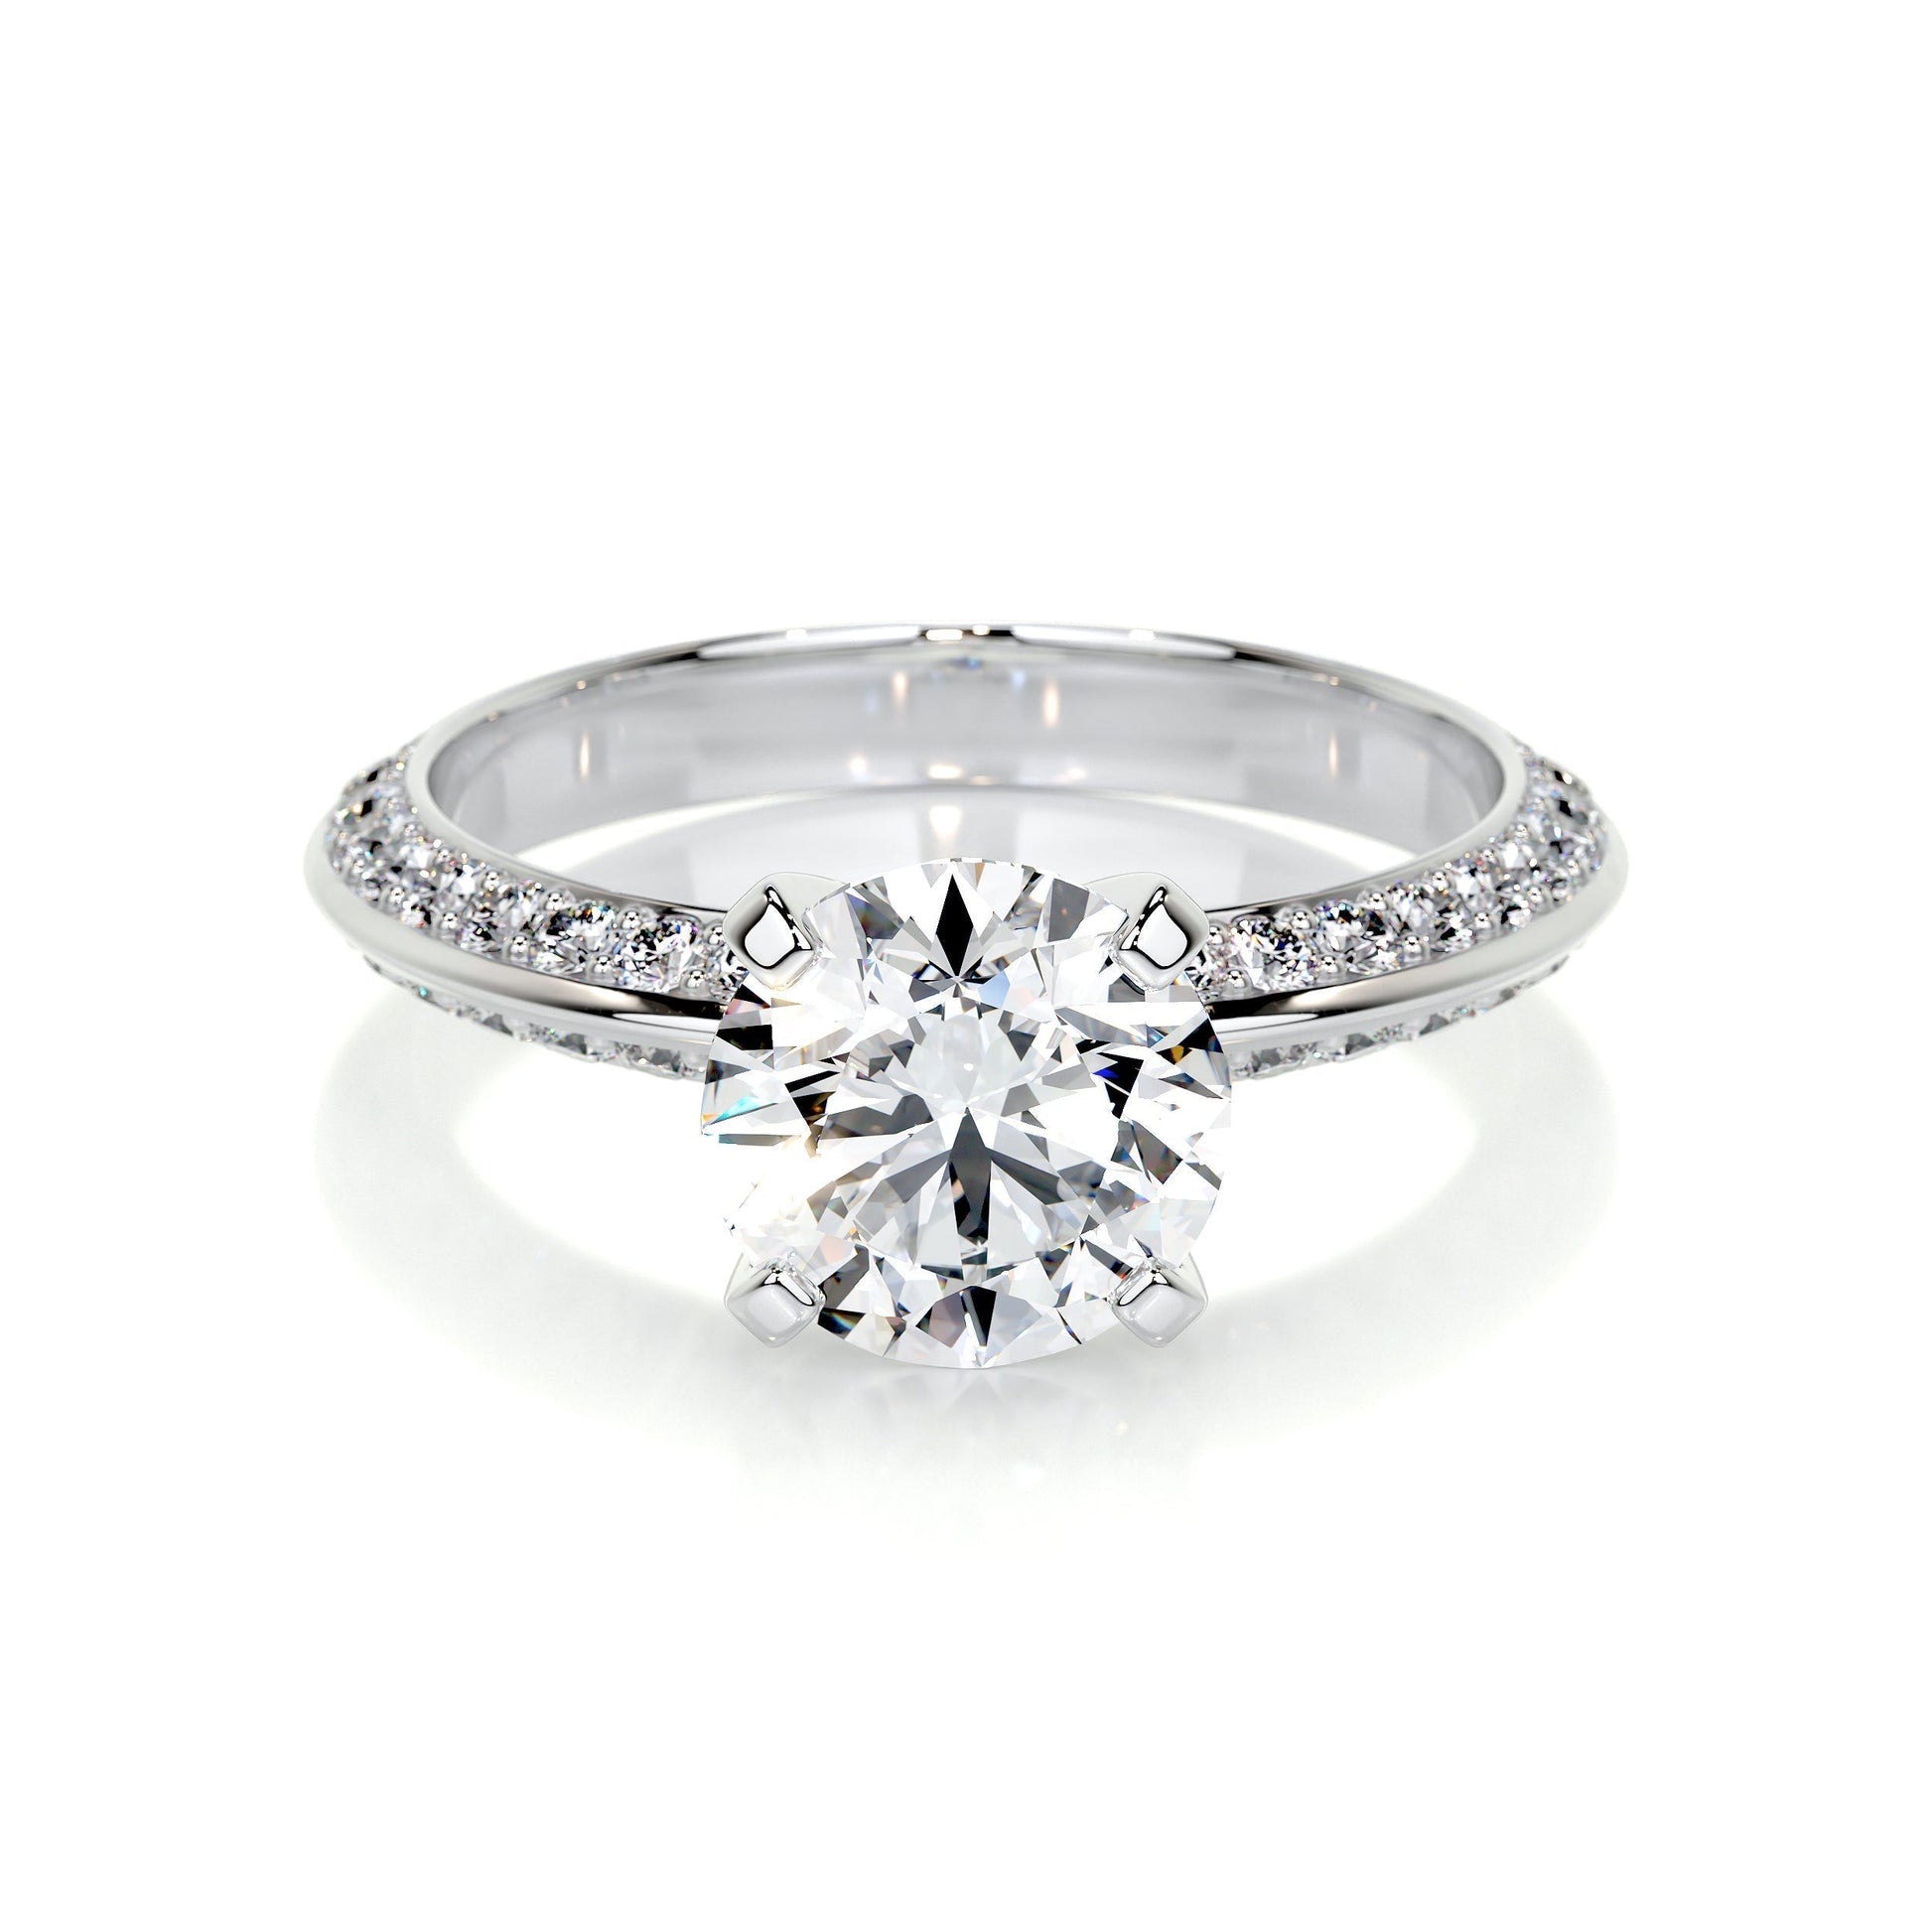 2.0 CT Round Solitaire CVD E/VS2 Diamond Engagement Ring 1